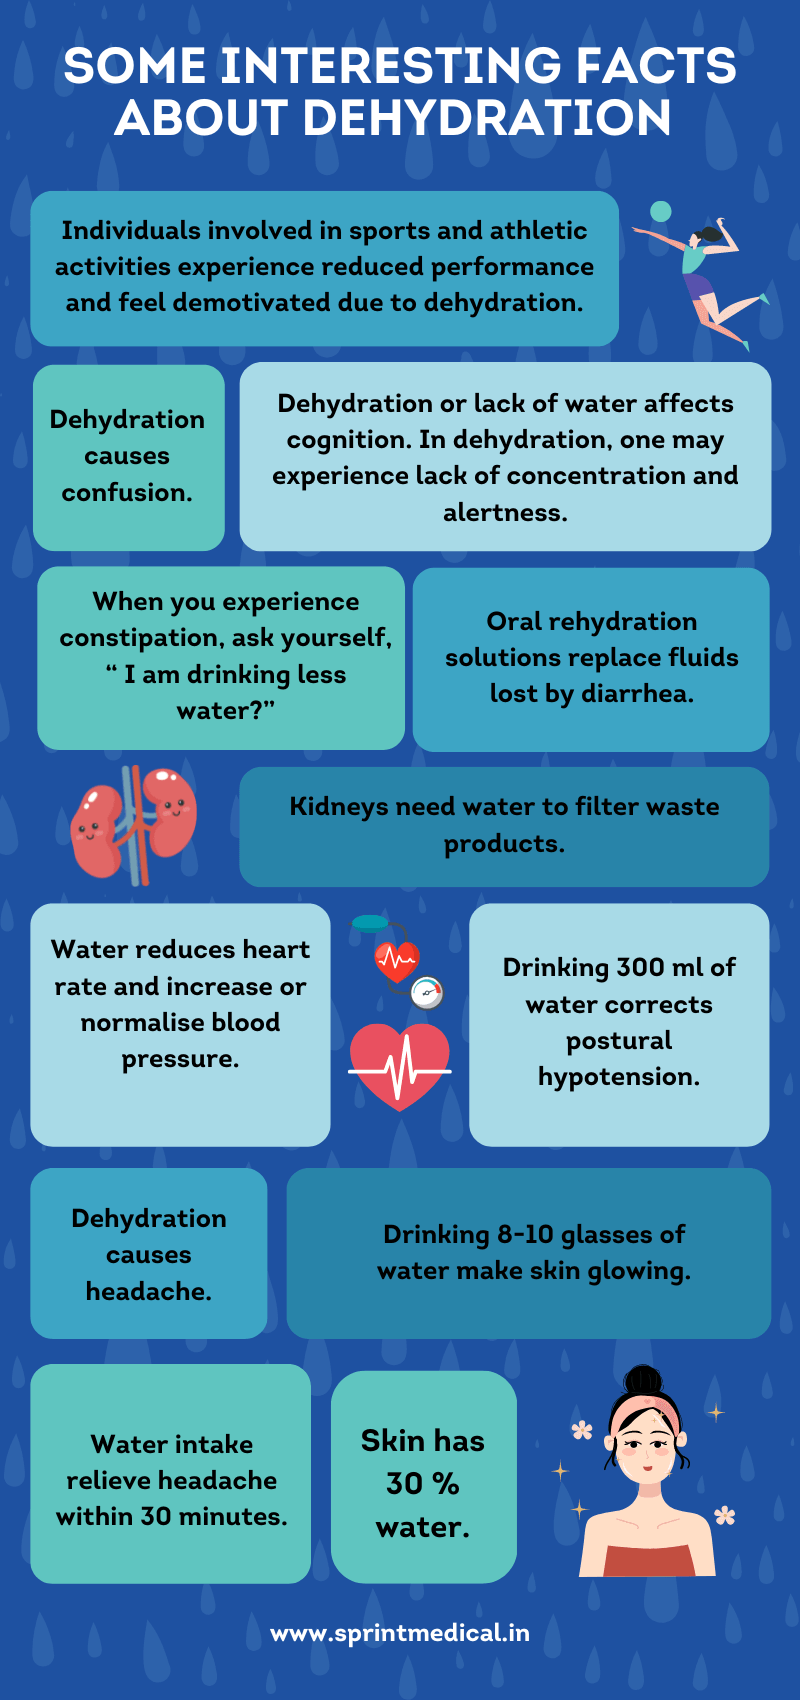 Dehydration and blood pressure